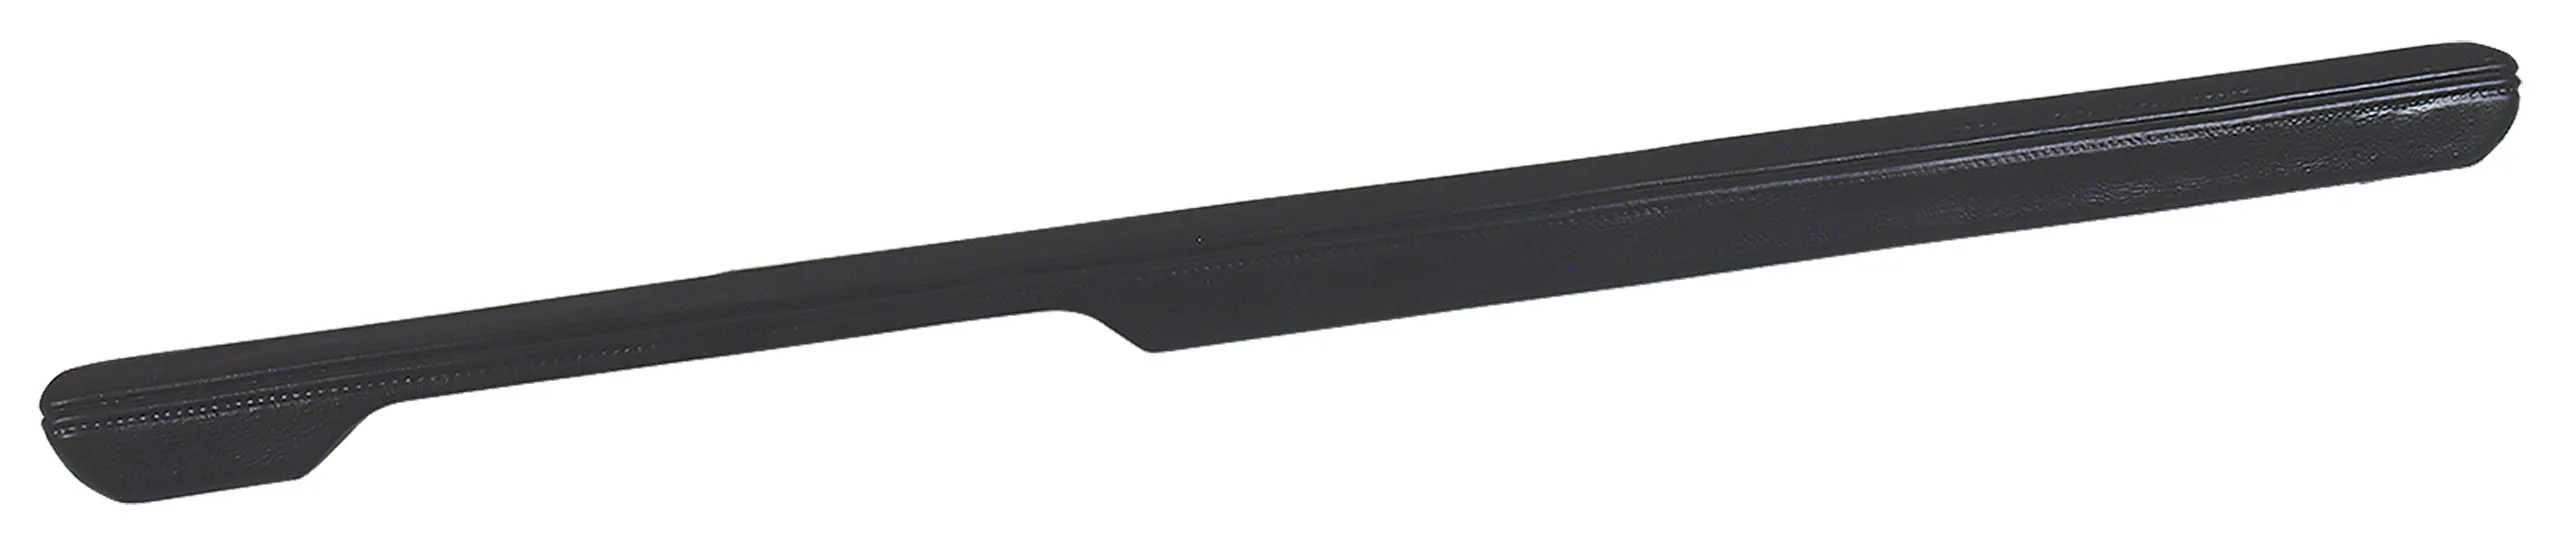 CA 1967-1968 Ford Mustang Lower Dash Pad - Black - Reproduction